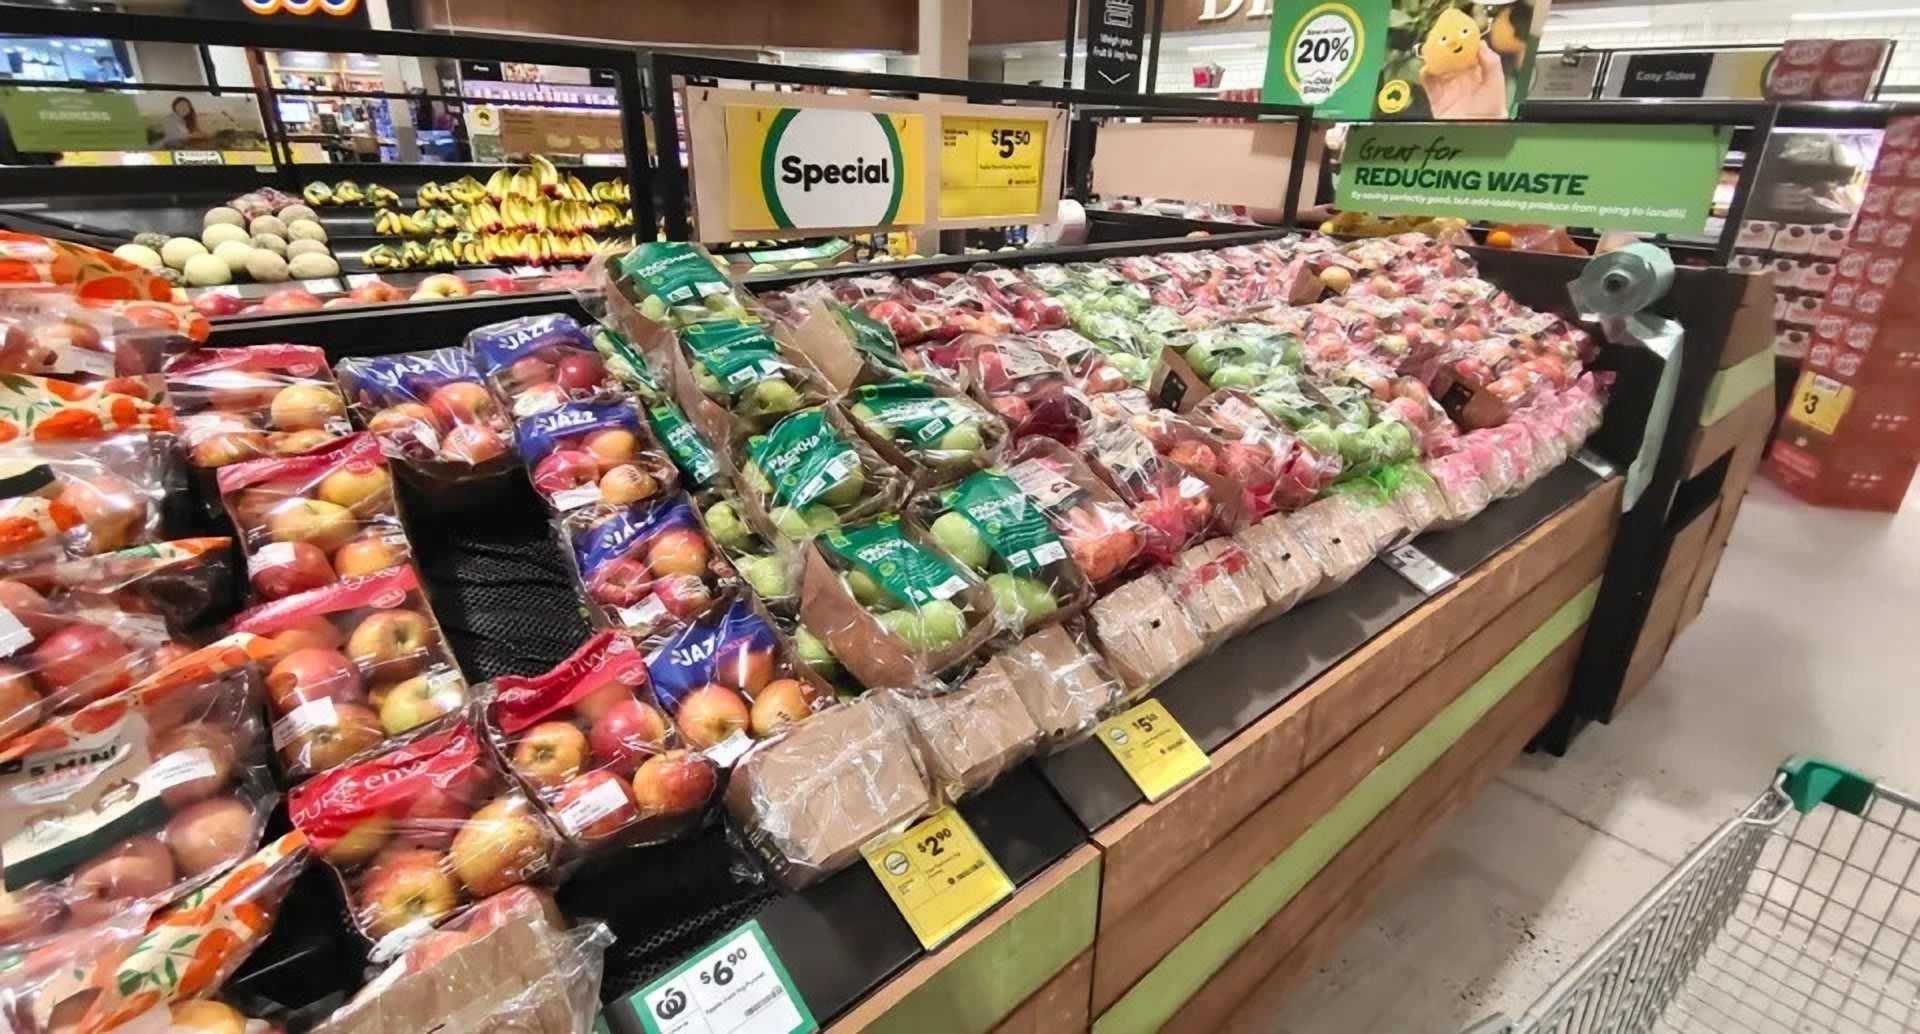 KnowESG_Woolworths Under Fire for Excessive Plastic Use